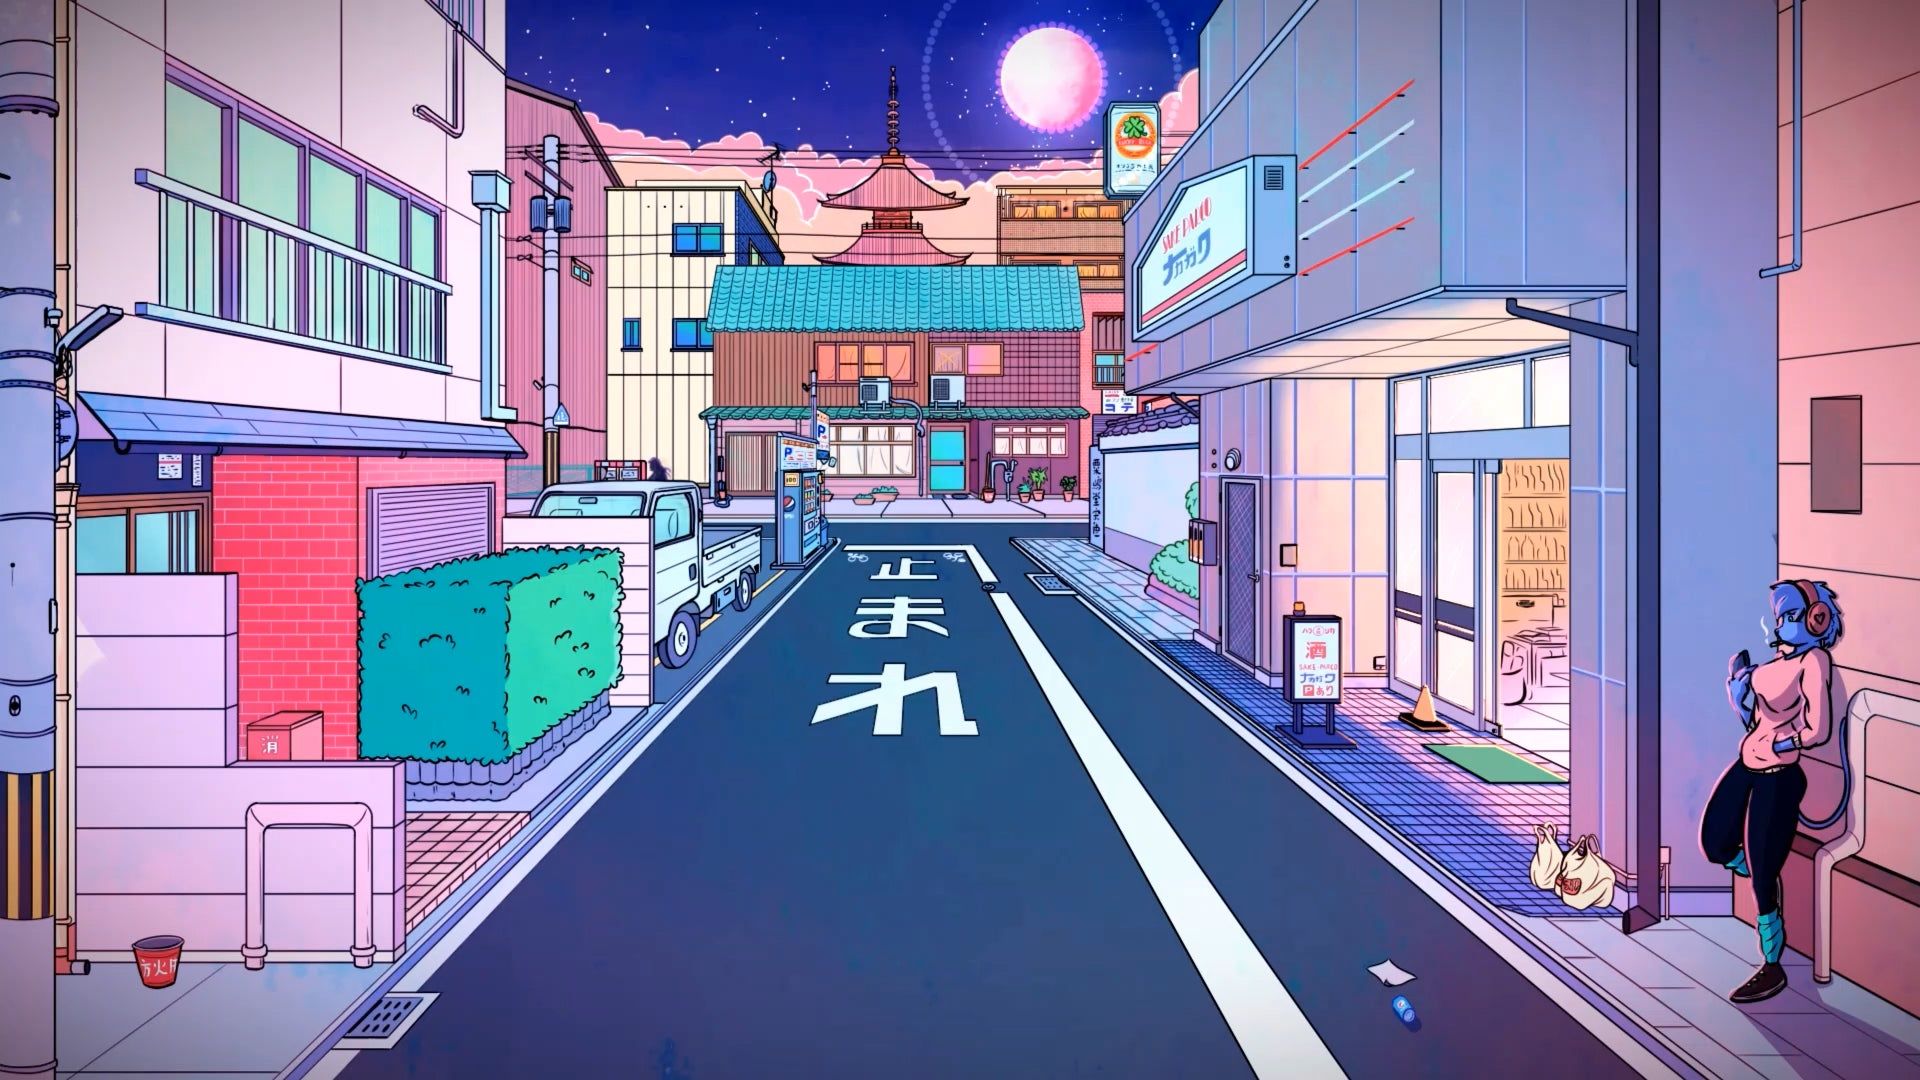 An anime style image of a street at night - Lo fi